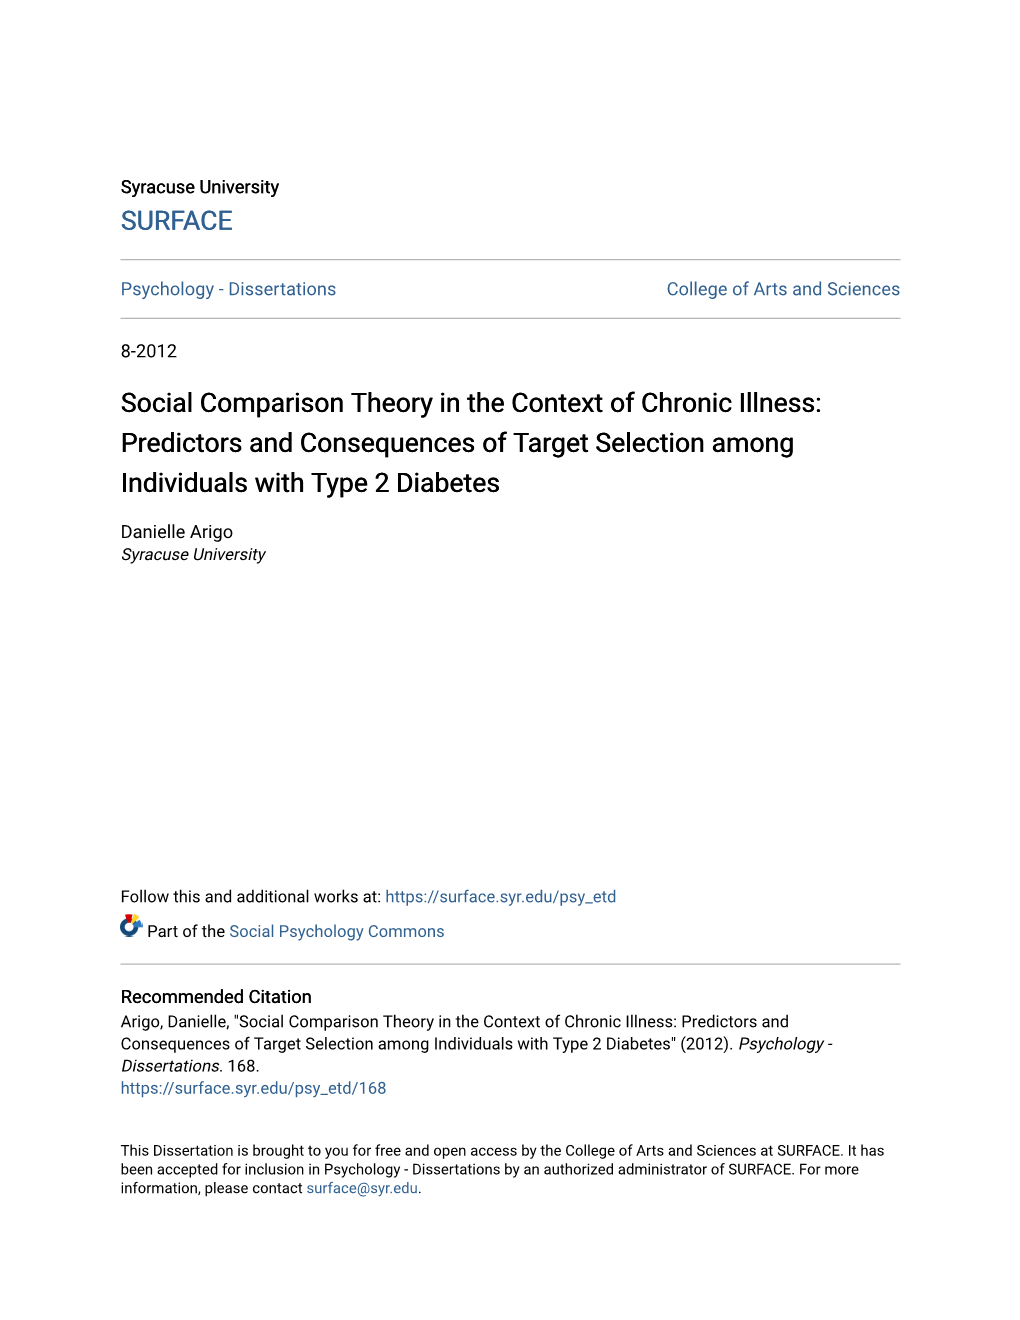 Social Comparison Theory in the Context of Chronic Illness: Predictors and Consequences of Target Selection Among Individuals with Type 2 Diabetes